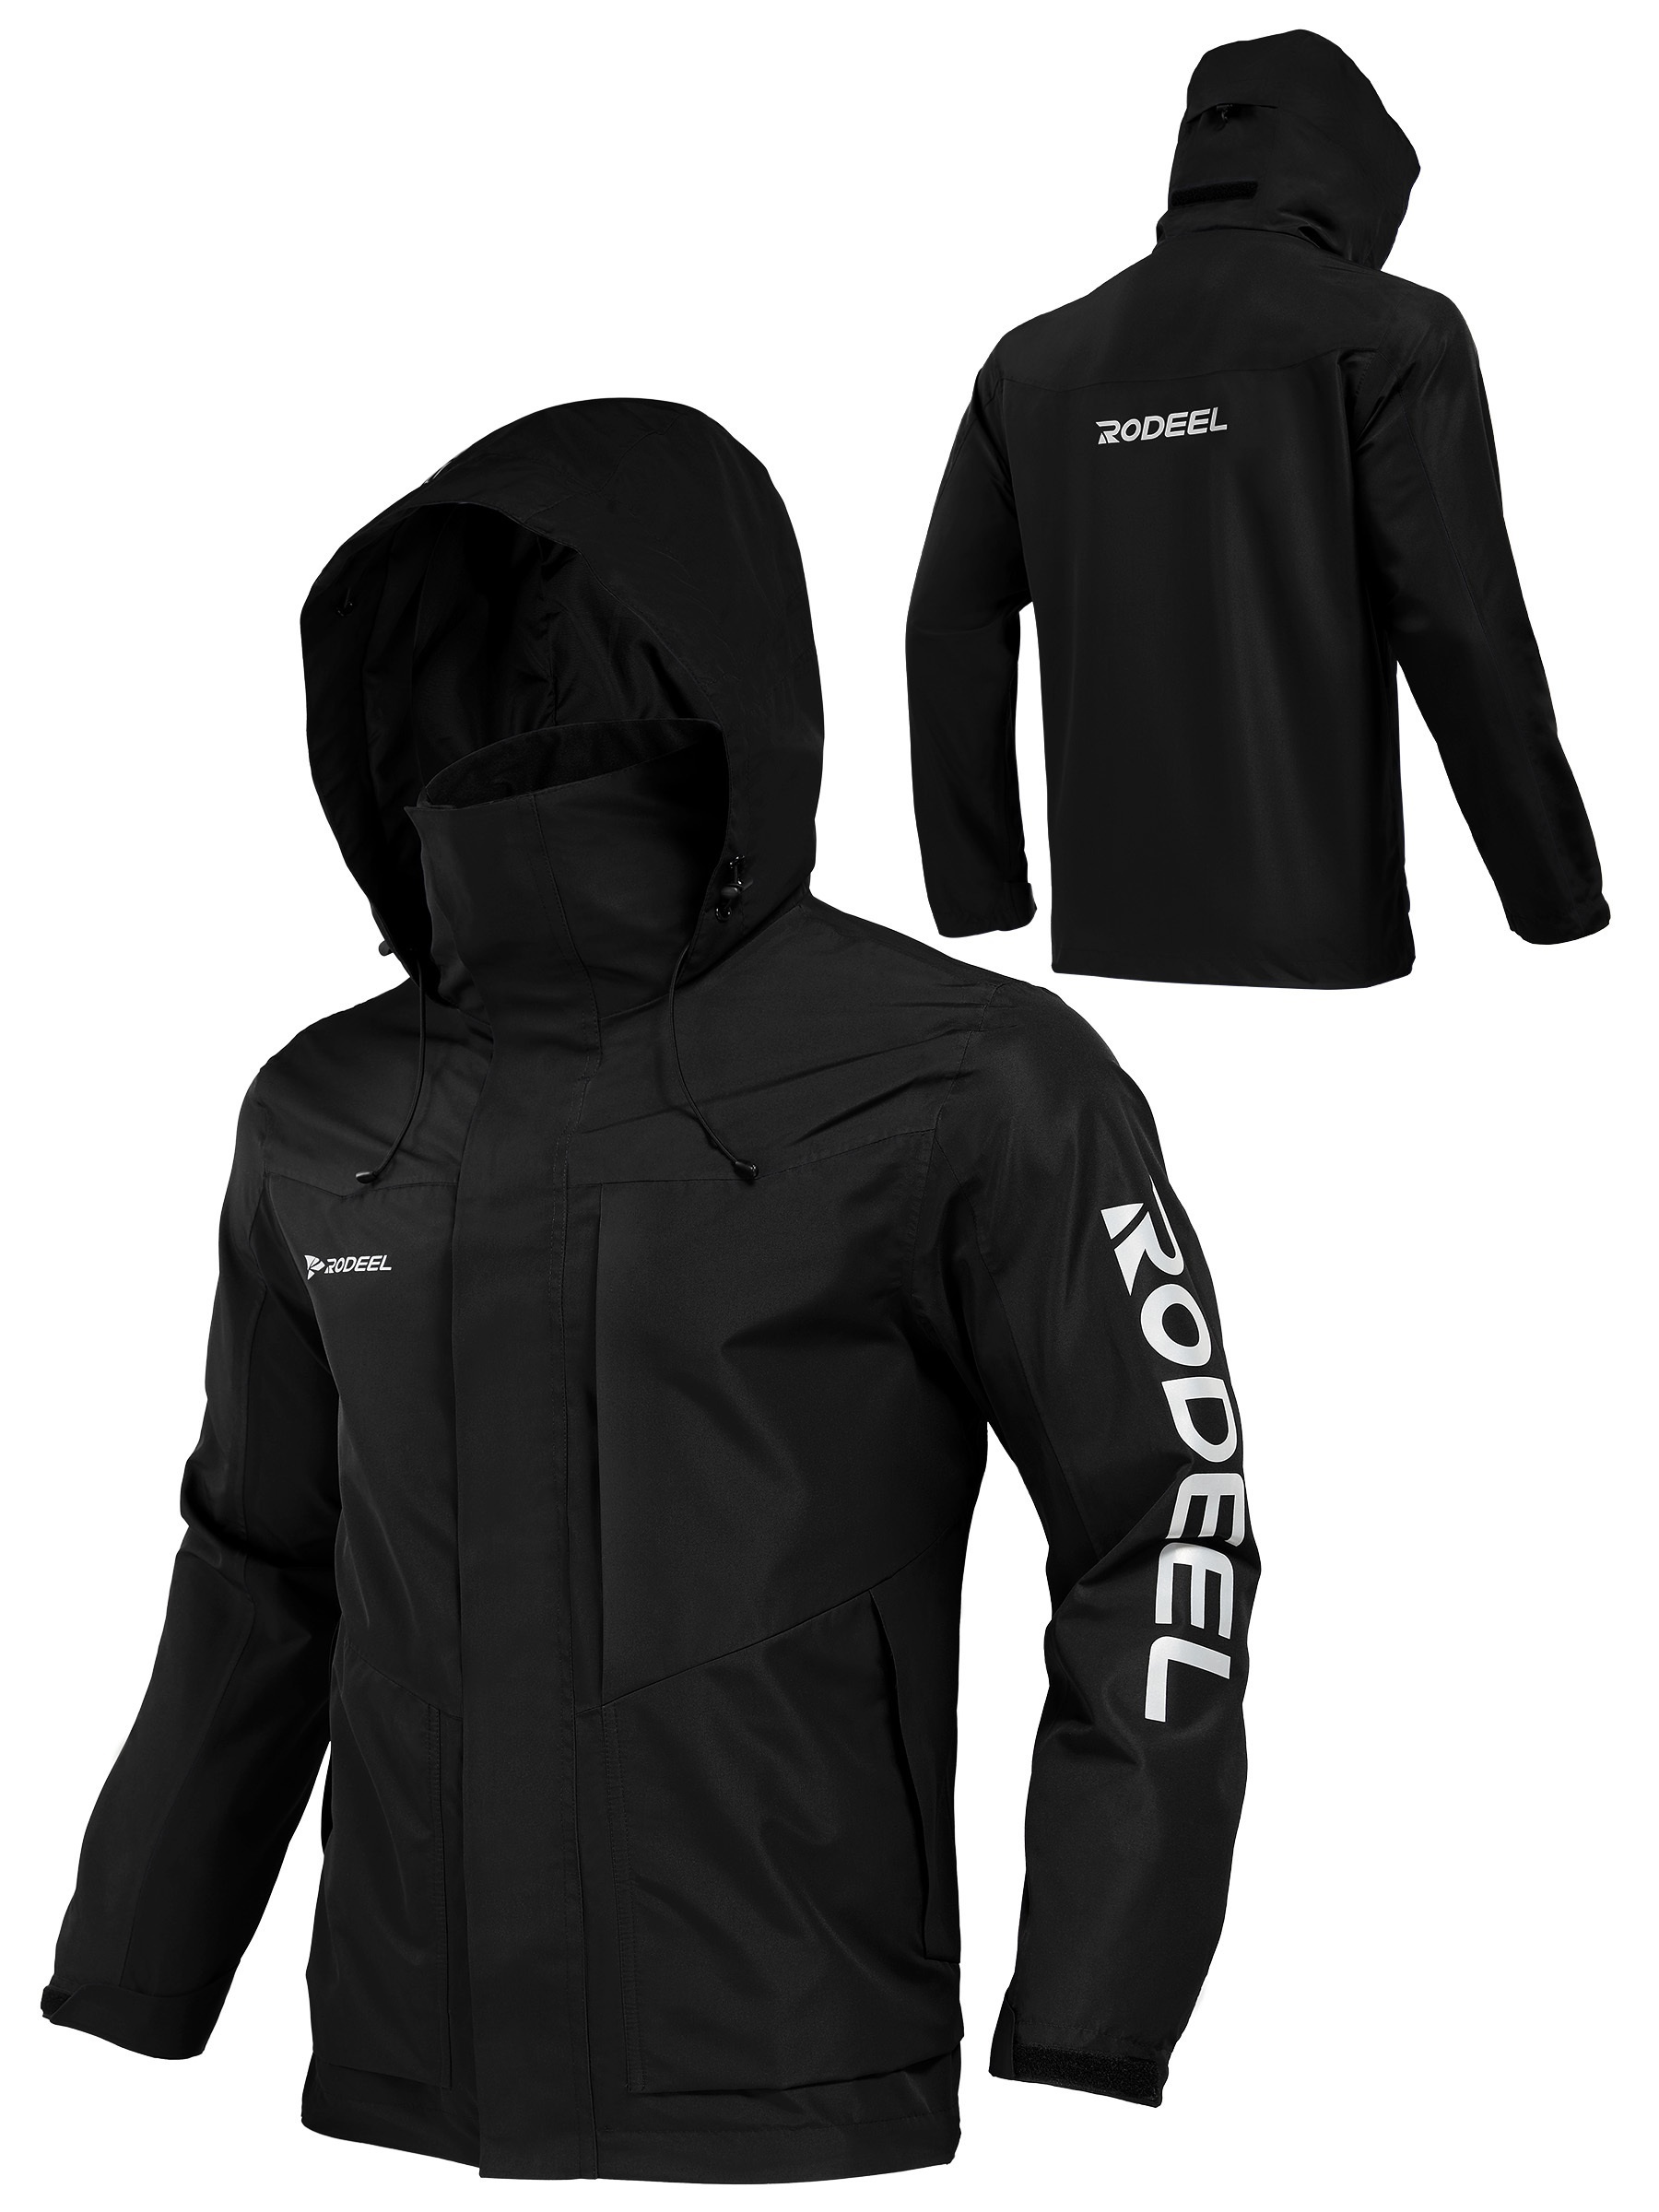 Rodeel Classic Men's Rain Jacket, Waterproof but Breathable Rain Coat,  Light Weight and Packable, for Outdoor Sports Such as Fishing, Hunting,  Hiking : : Fashion